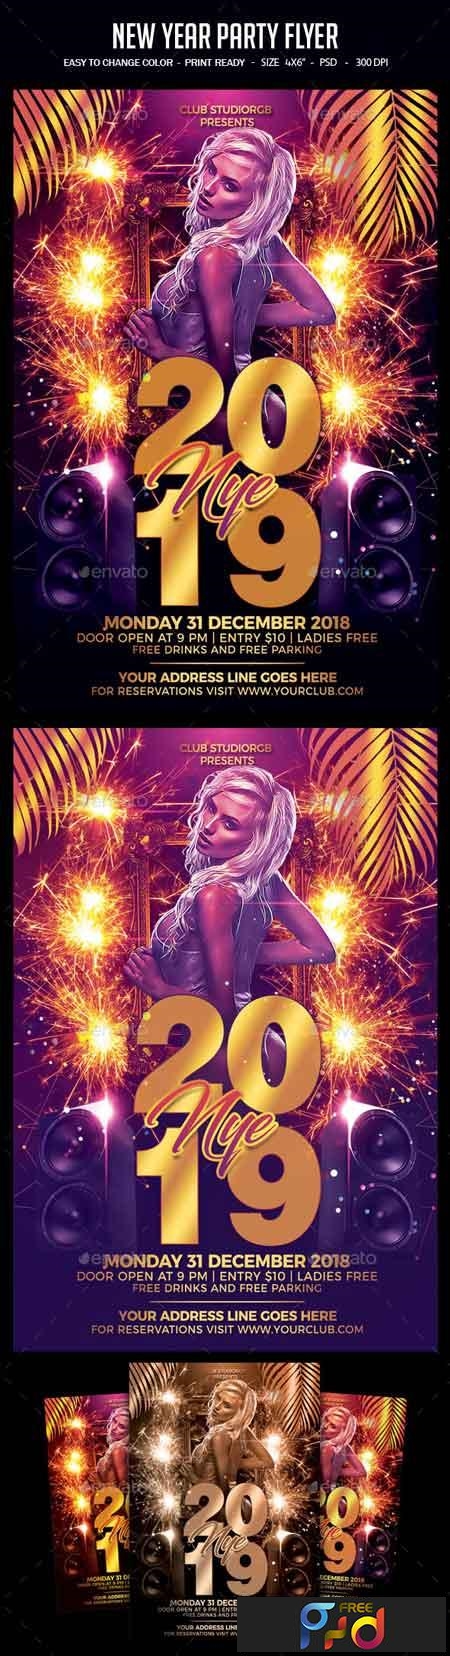 FreePsdVn.com 1901325 TEMPLATE new year party flyer 22878168